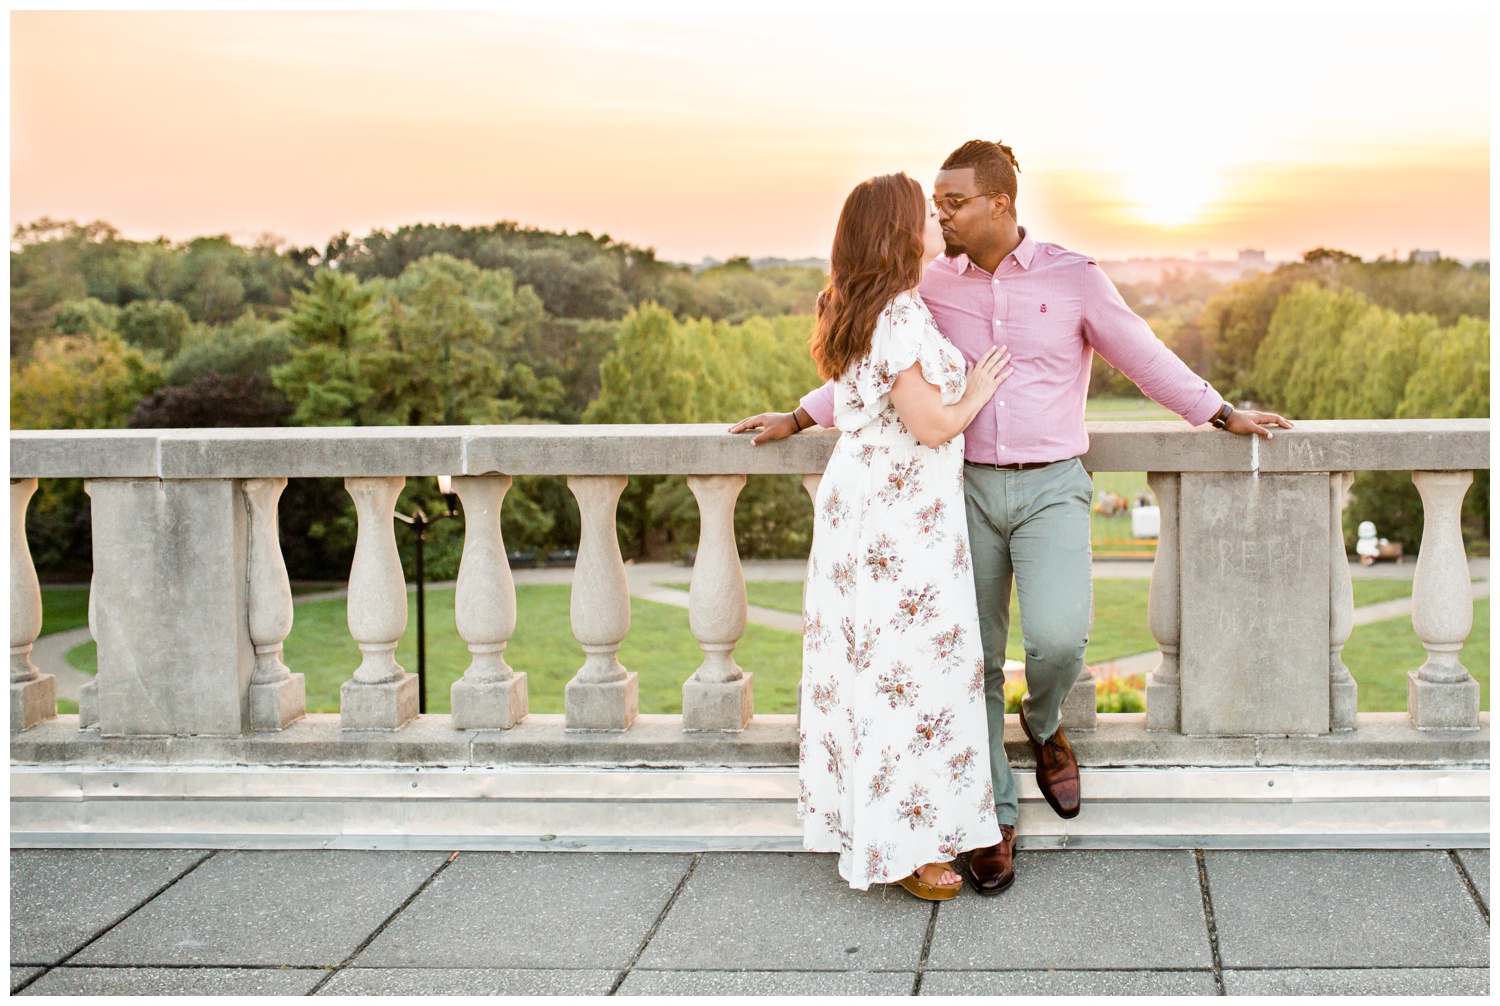 Sunset Engagement Session at Ault Park - Interracial Couple